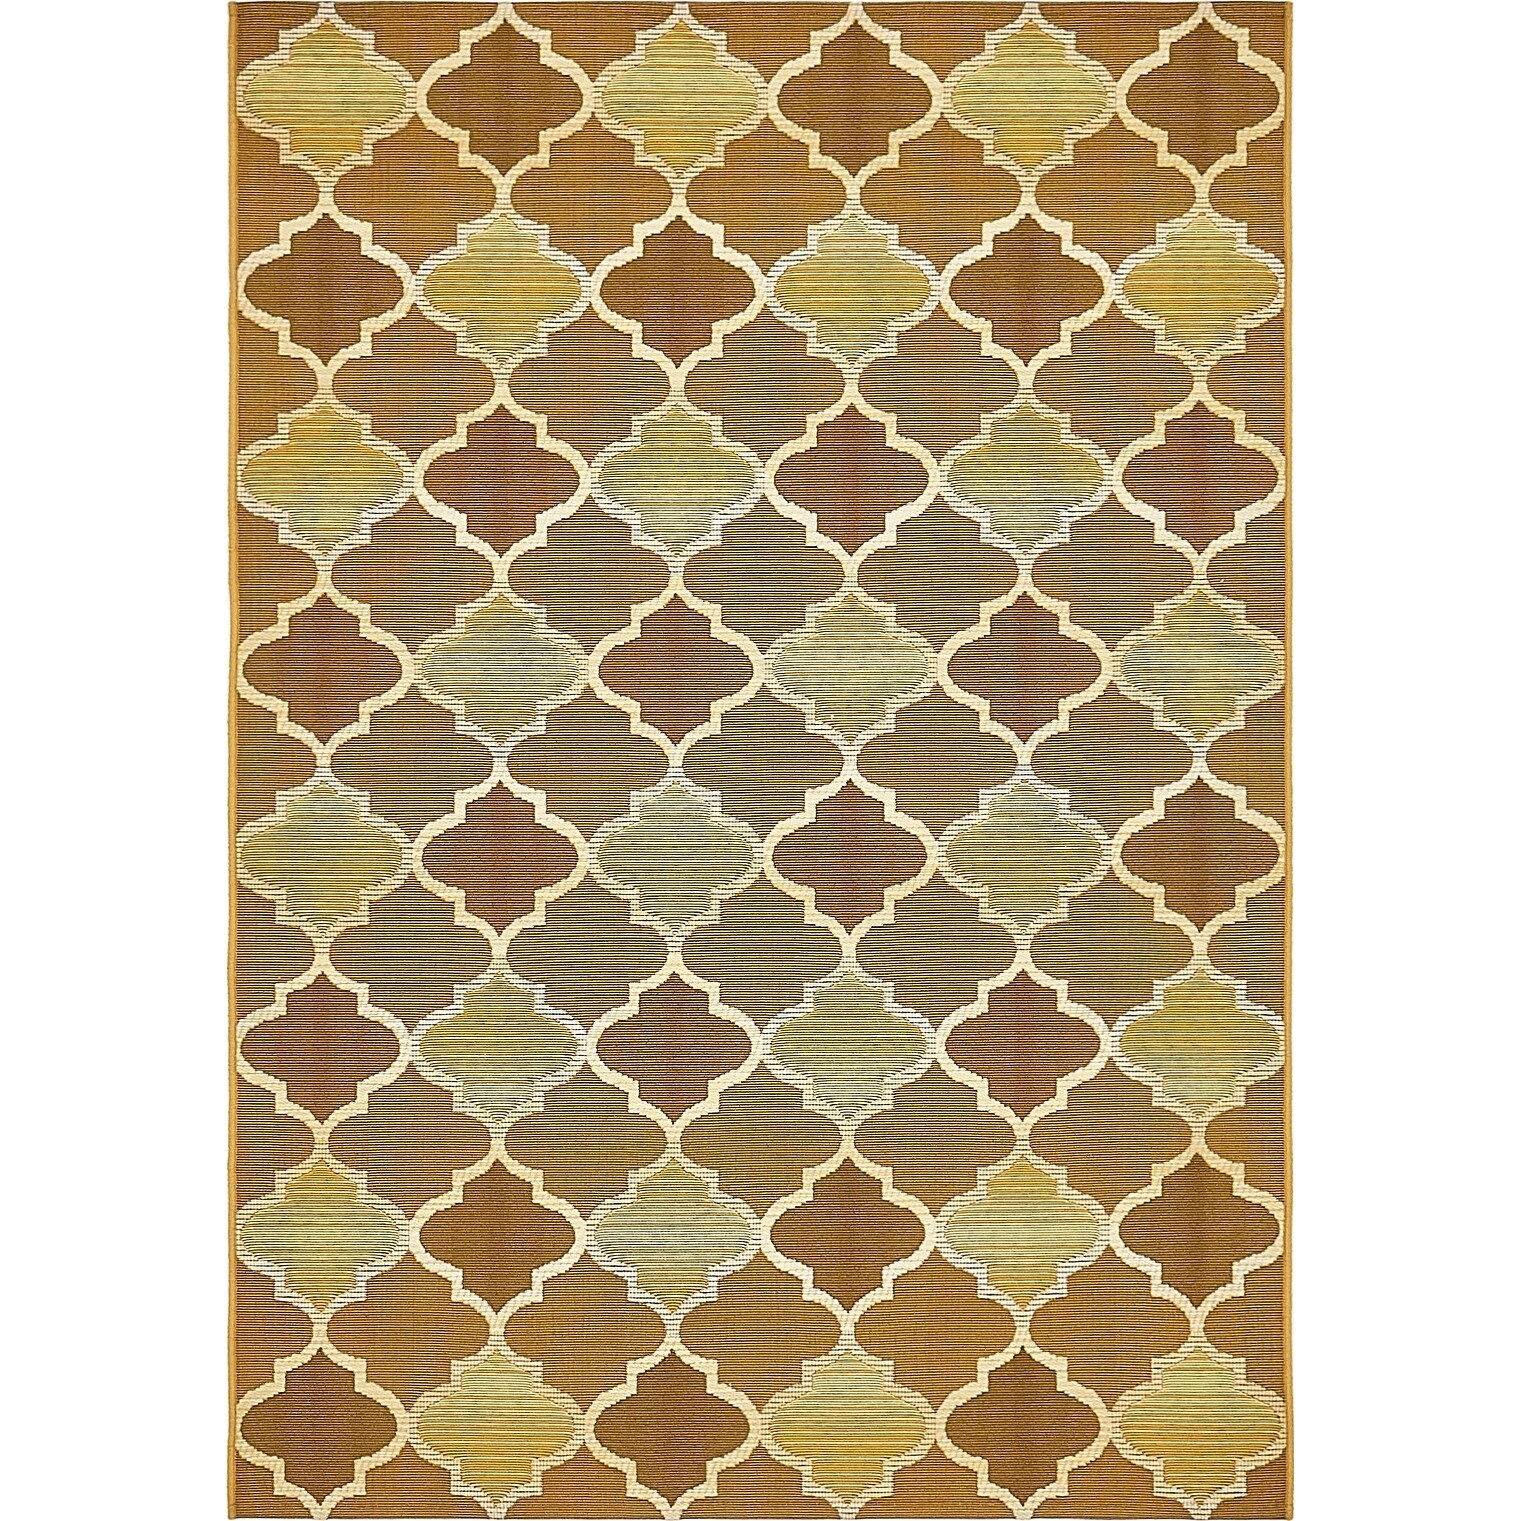 Buy Yellow 4 X 6 Area Rugs Online At Overstockcom Our Best